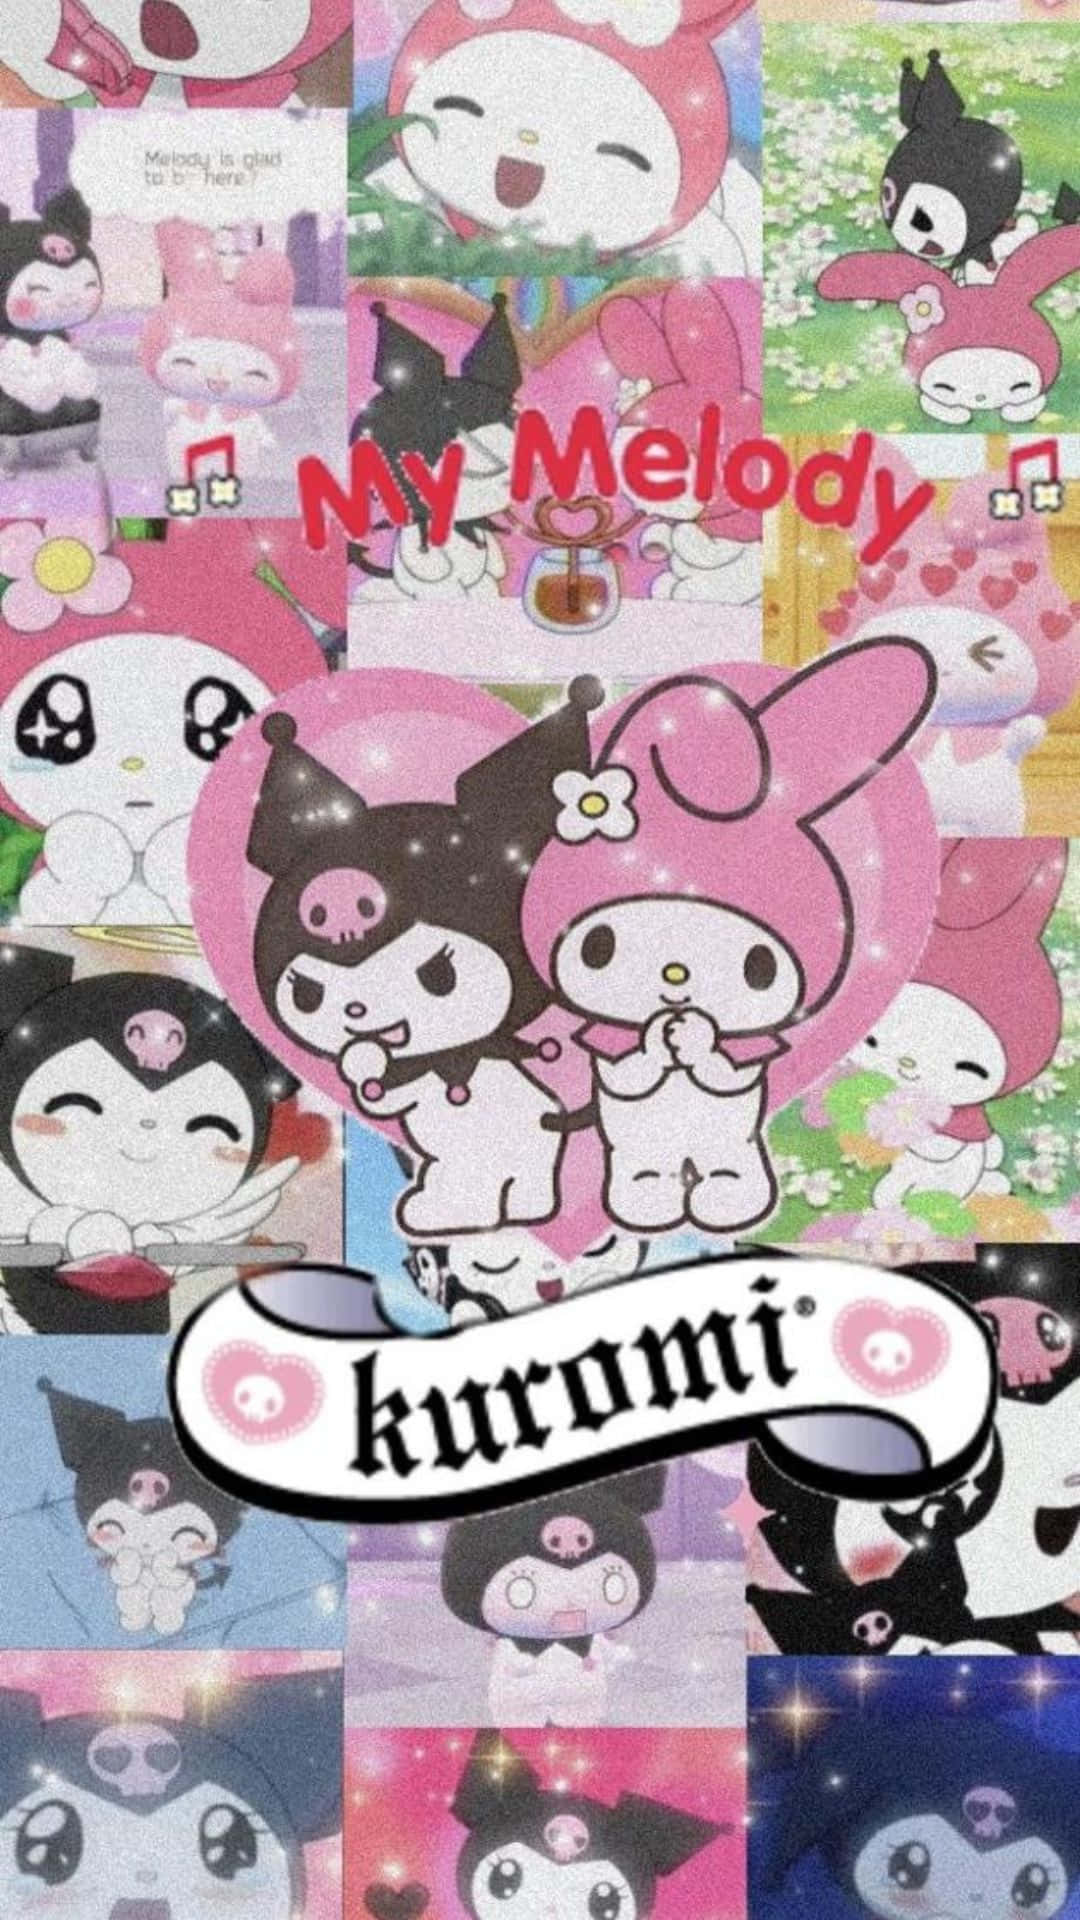 Kuromi and My Melody enjoying a friendly moment together Wallpaper